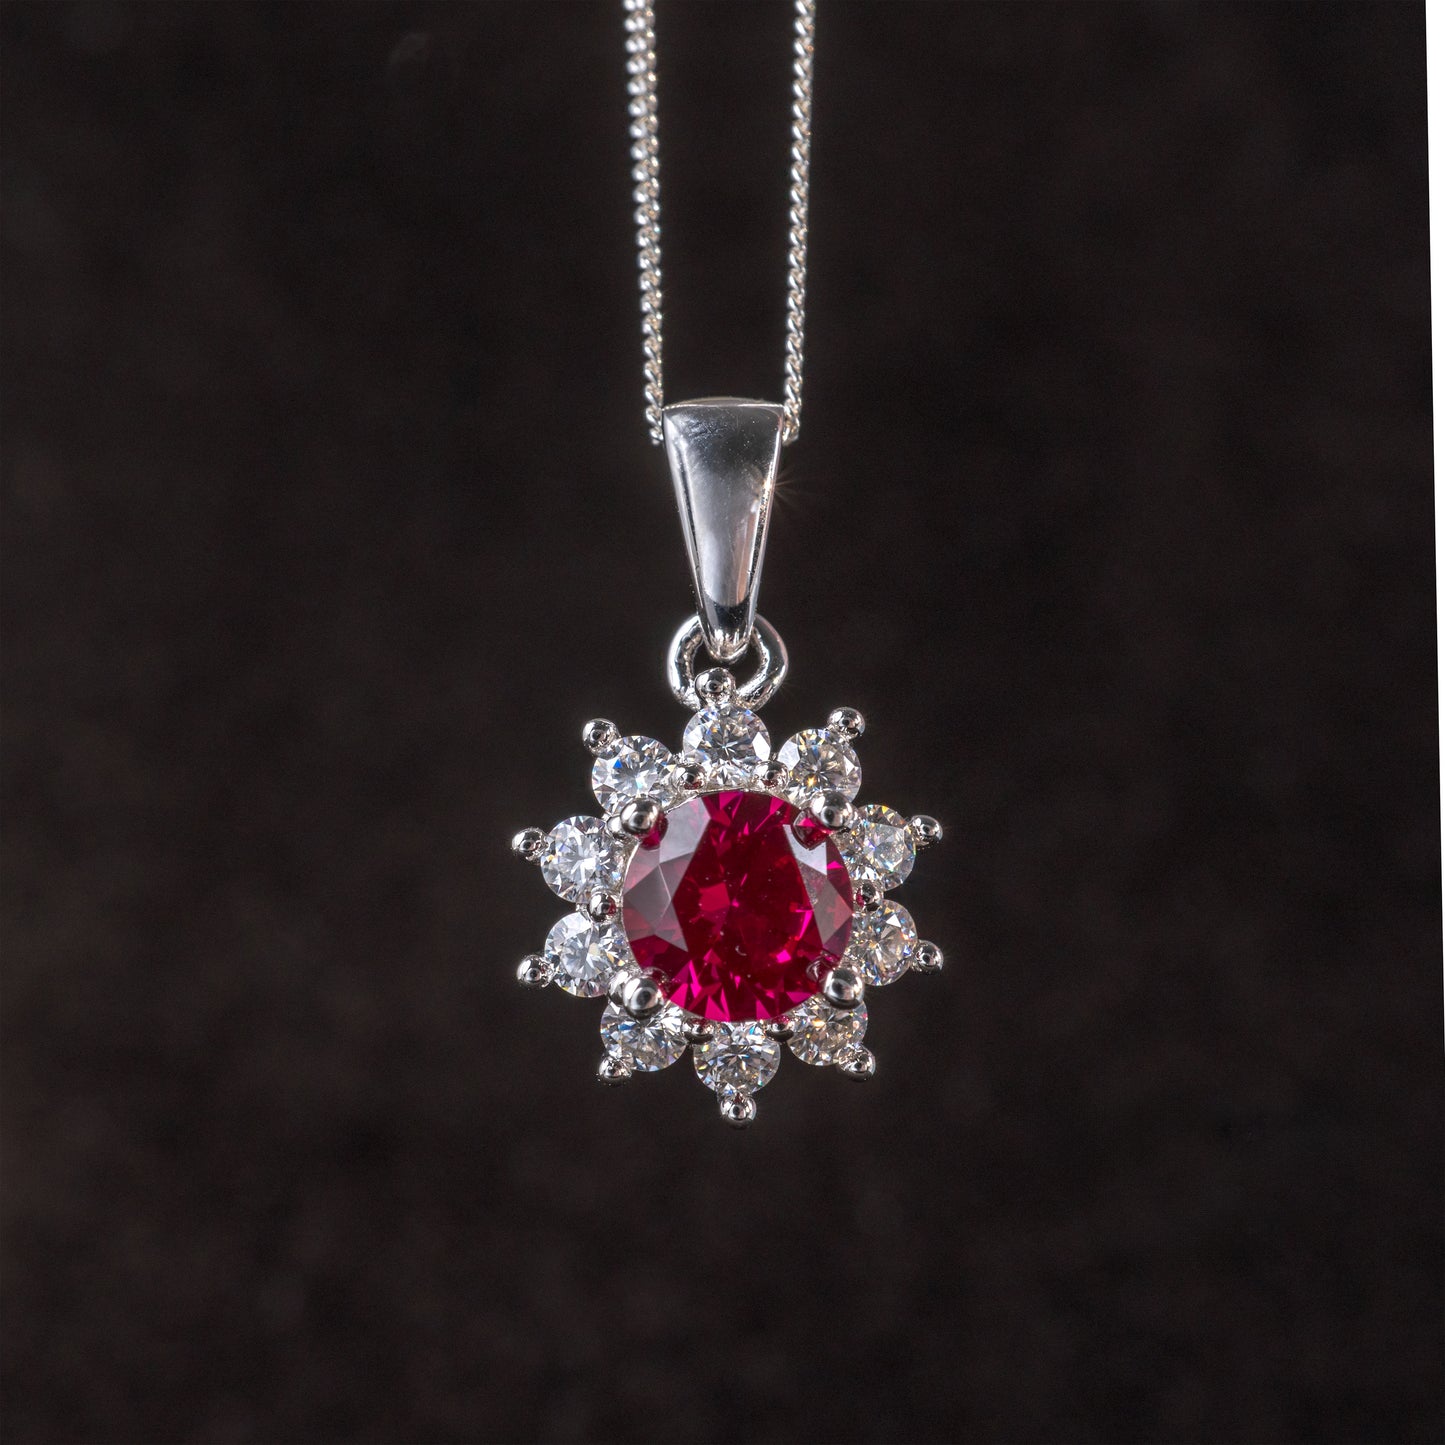 Lab Ruby Moissanite Halo Statement Pendant Rhodium Plated 925 Silver + Adjustable Chain